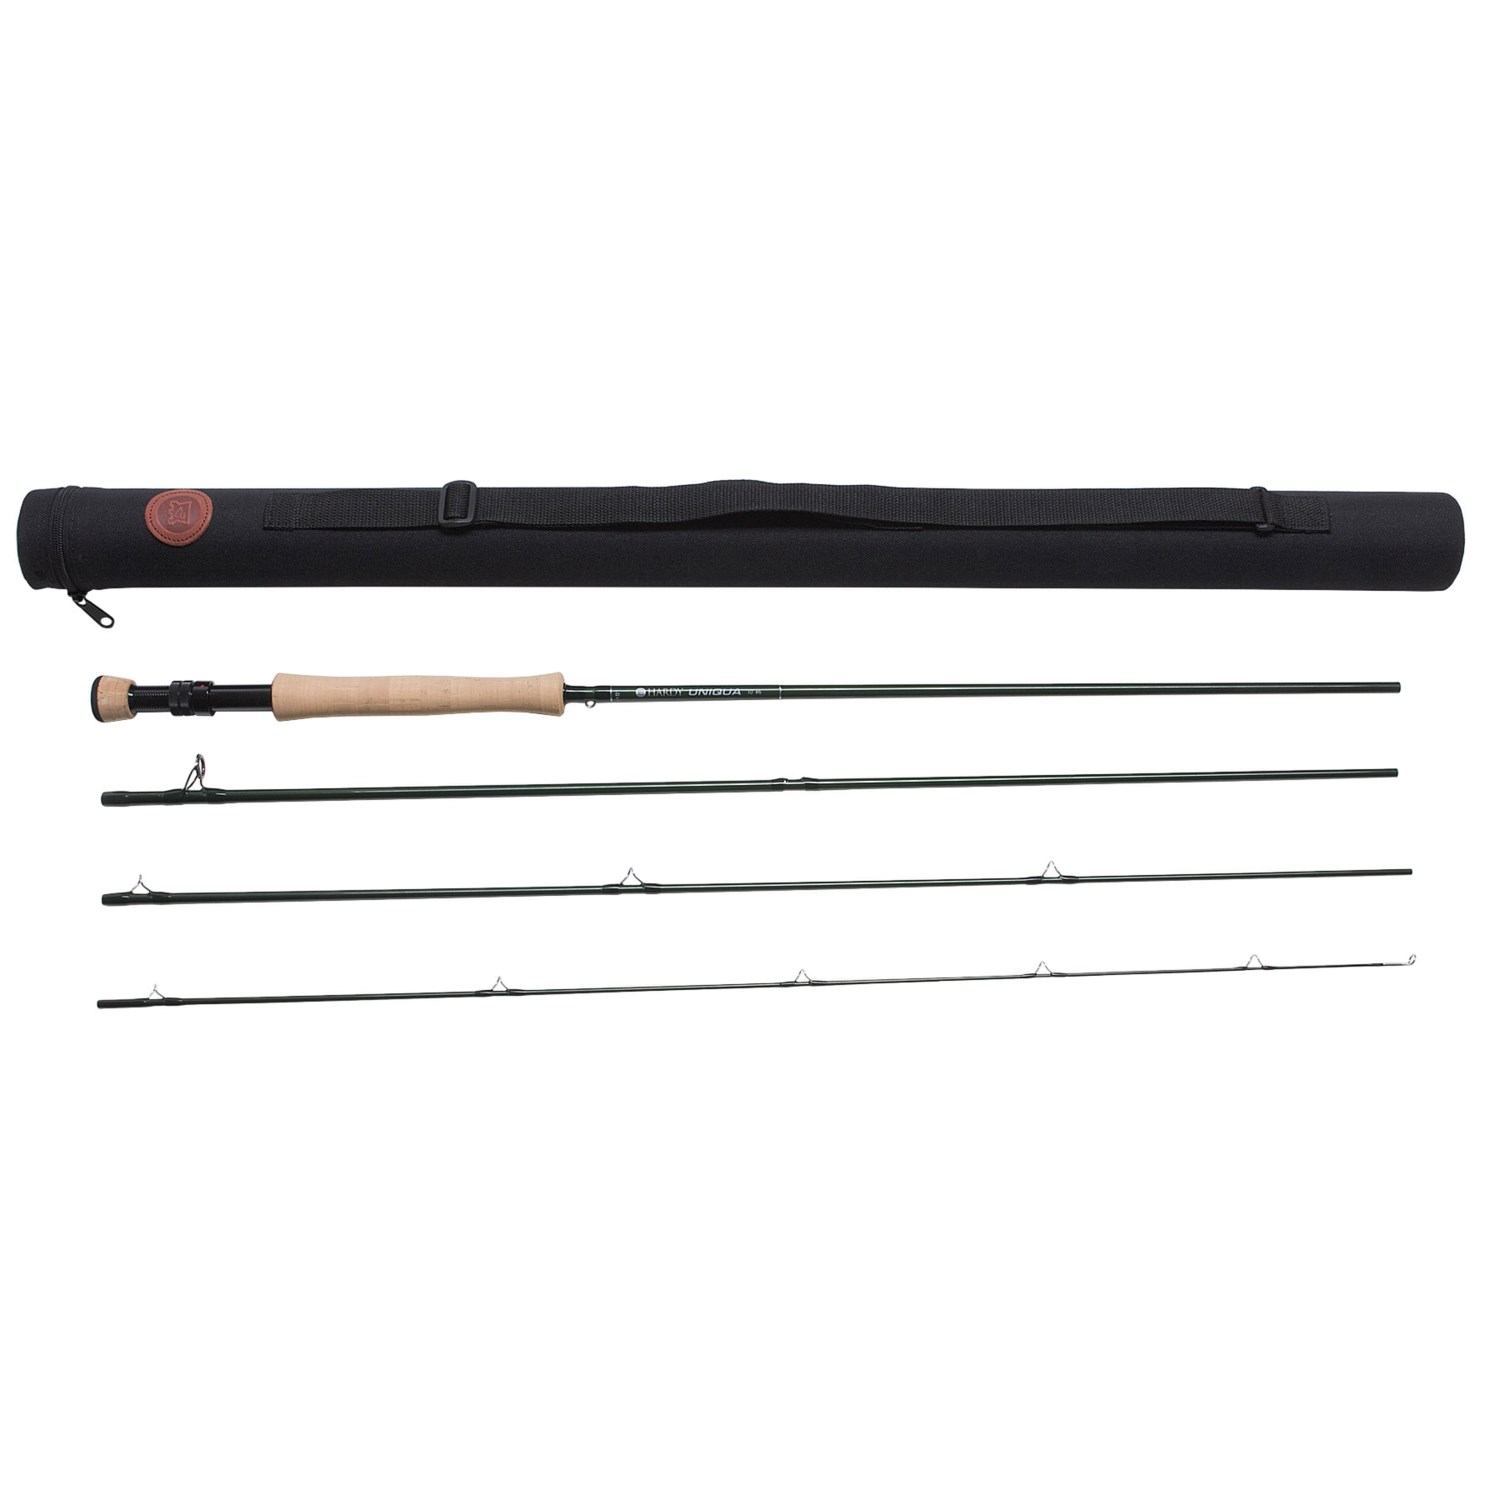 Hardy Uniqua Fly Fishing Rod   4 Piece, 10’ 6 7wt in See Photo